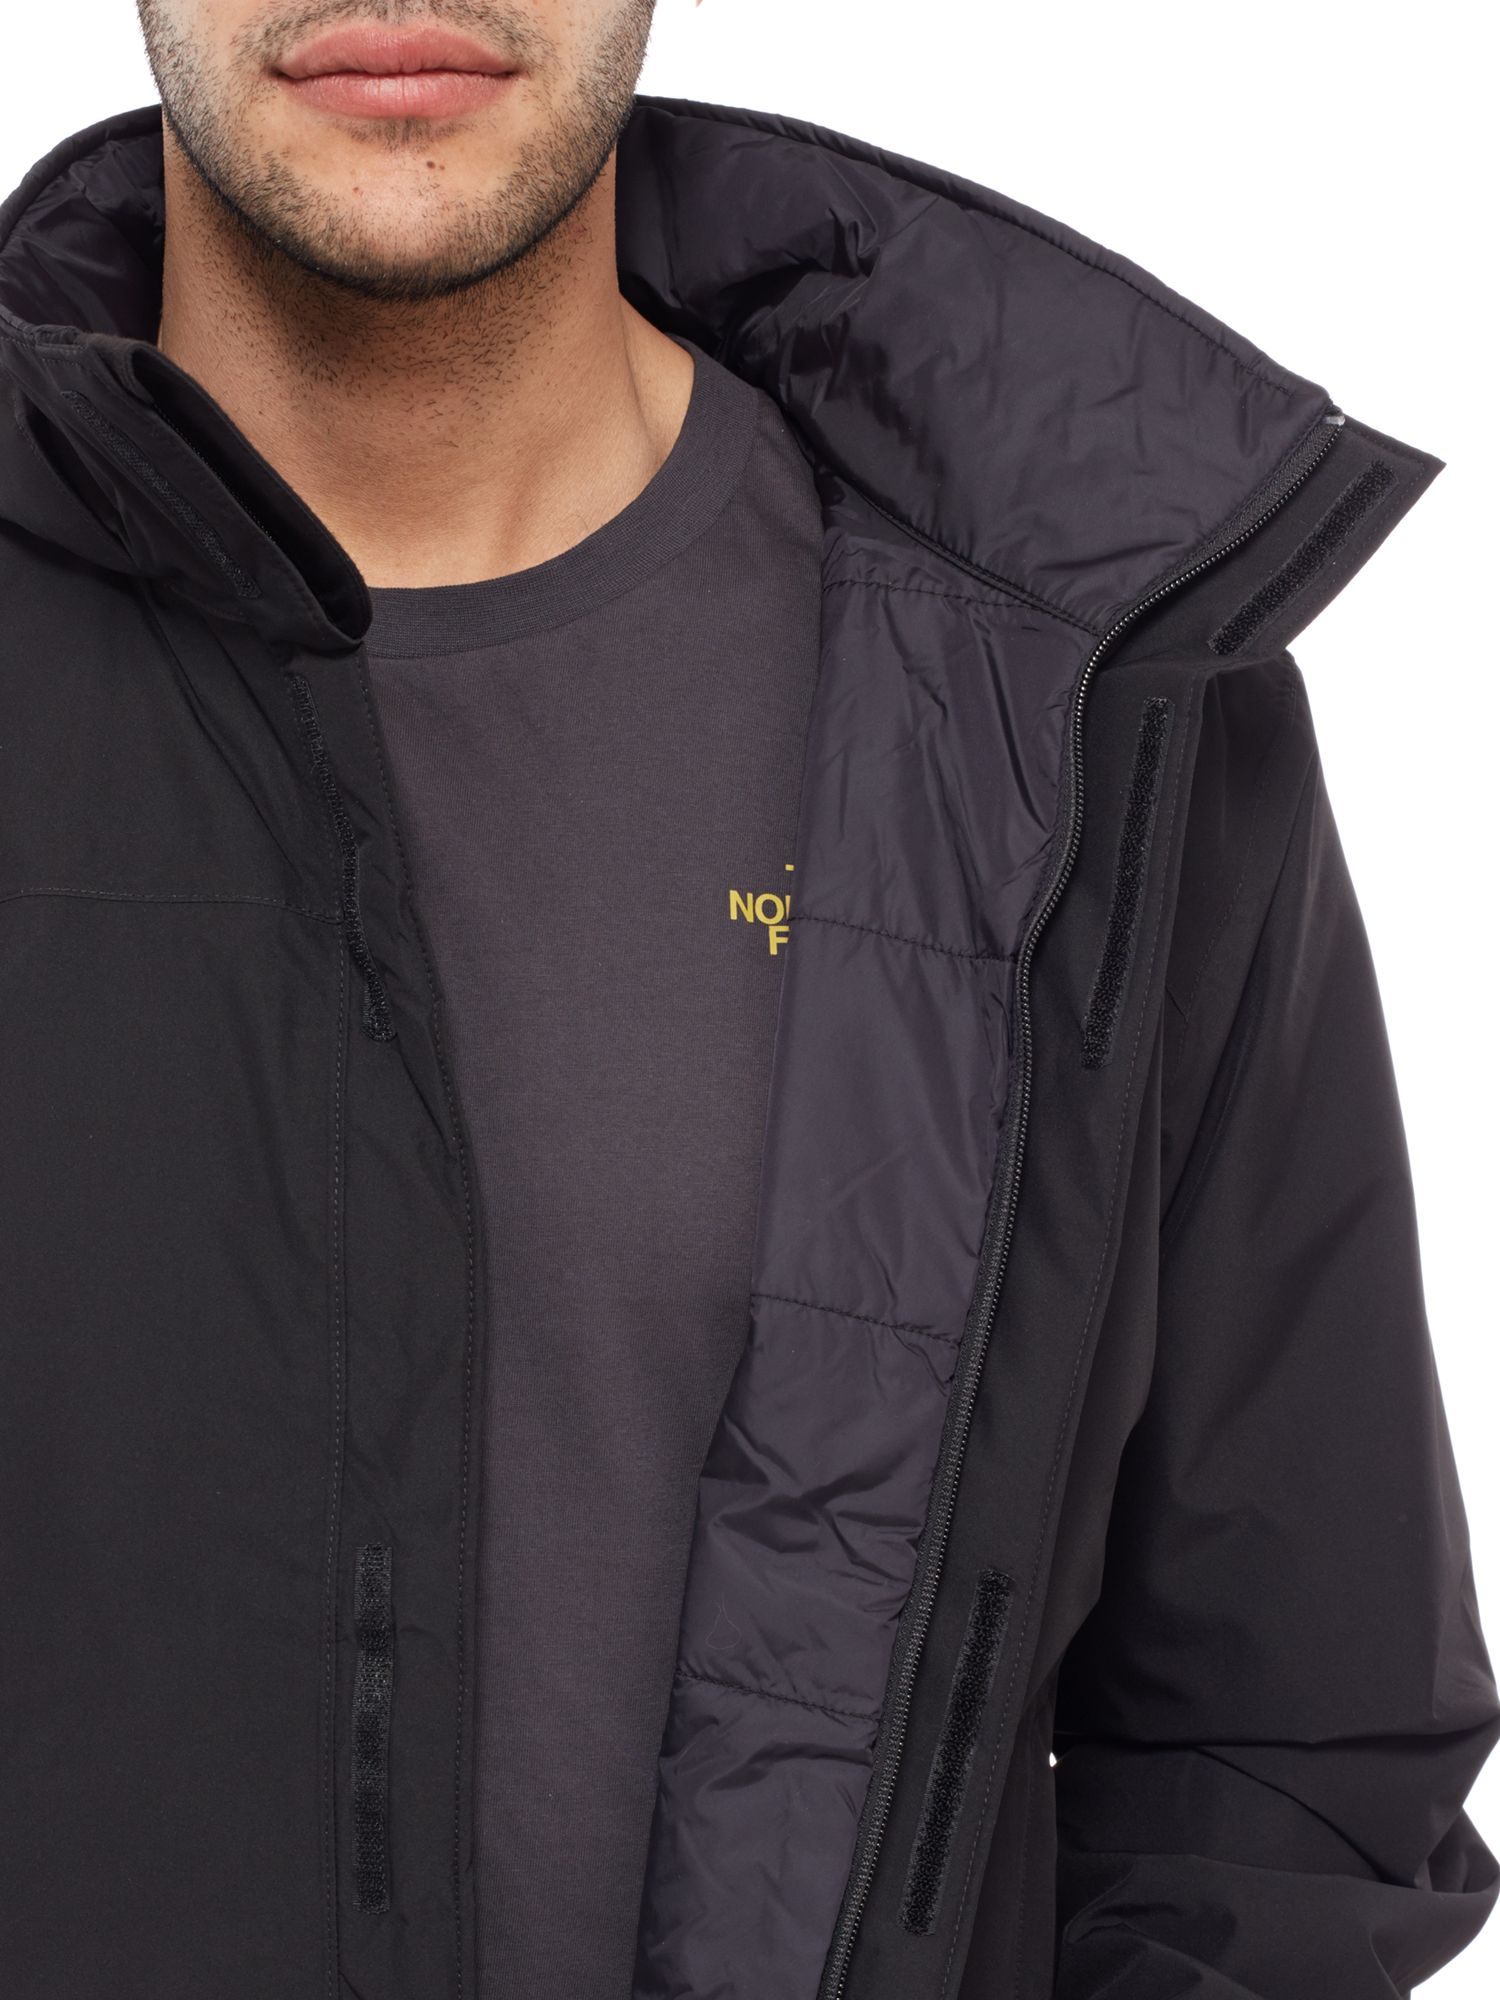 North Face Resolve Insulated Waterproof 